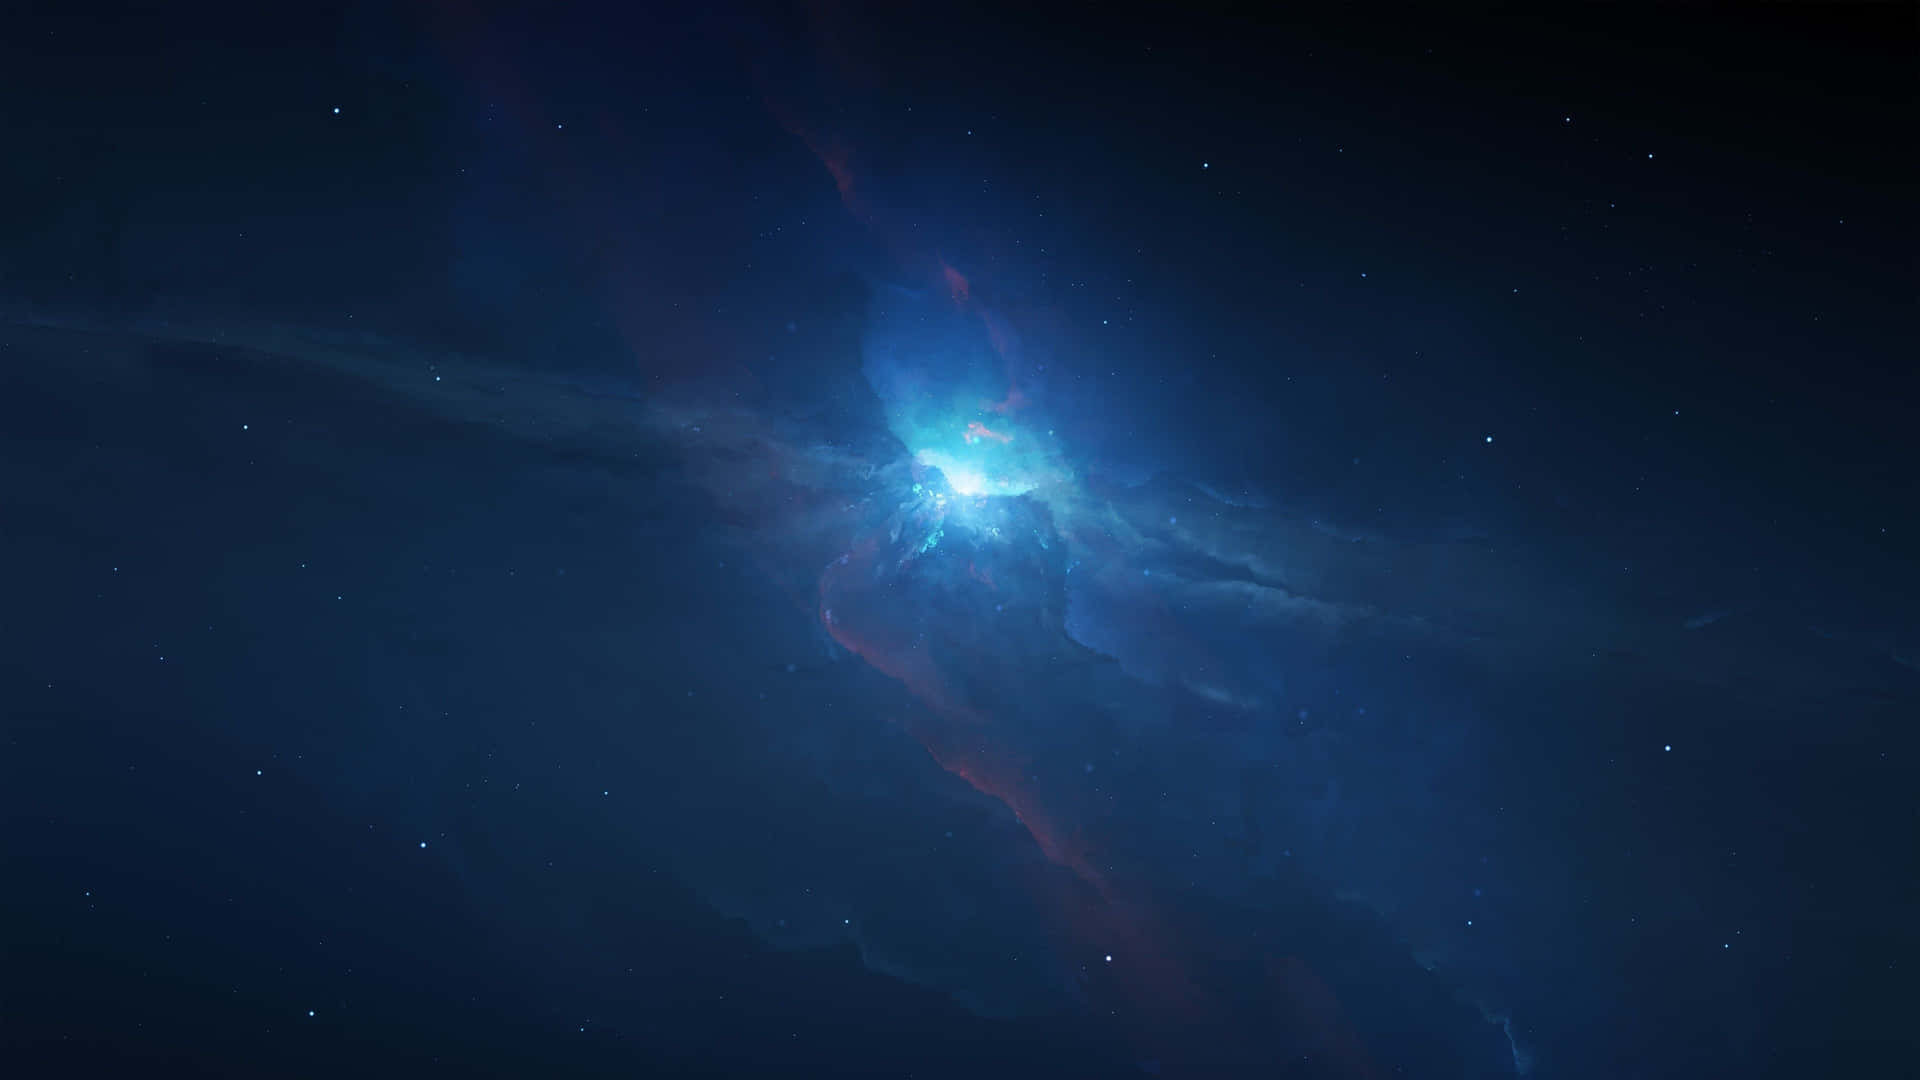 A Blue Star In The Sky With A Blue Background